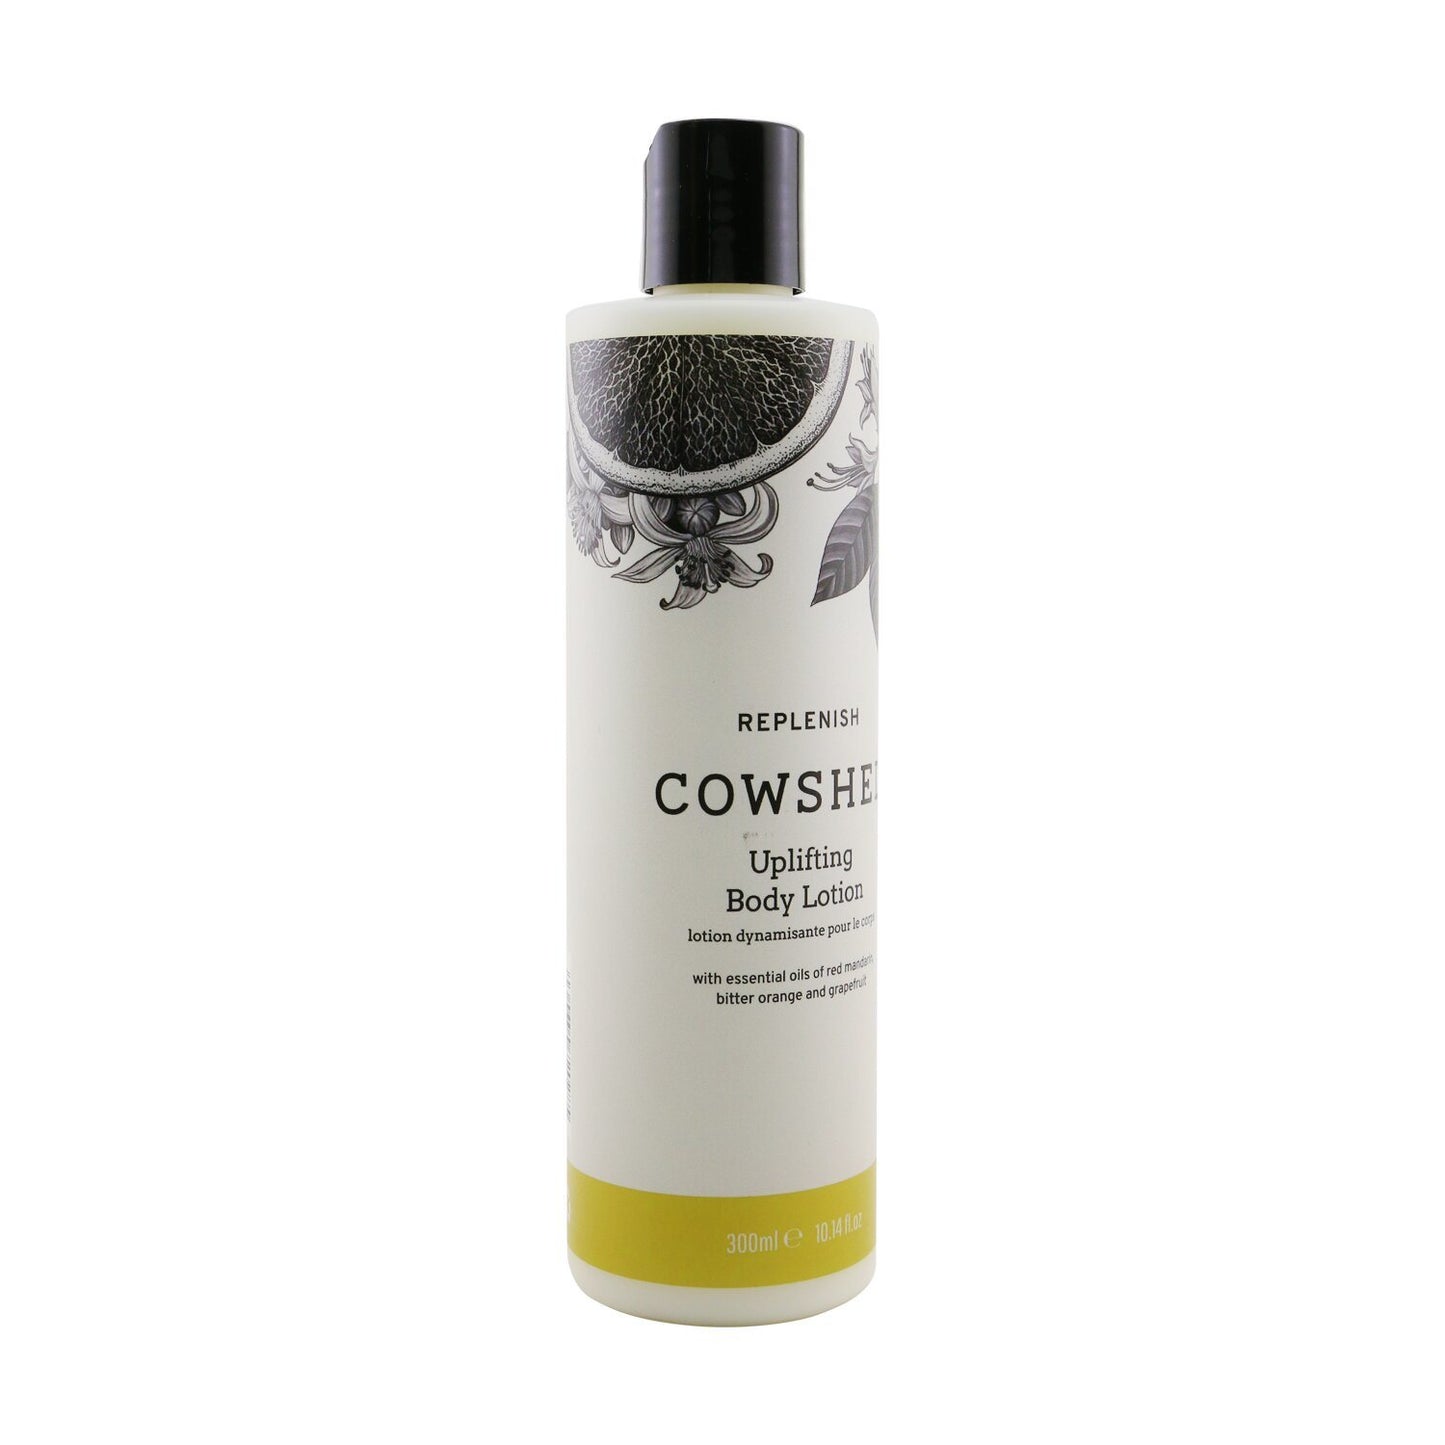 COWSHED - Replenish Uplifting Body Lotion 72021 300ml/10.14oz